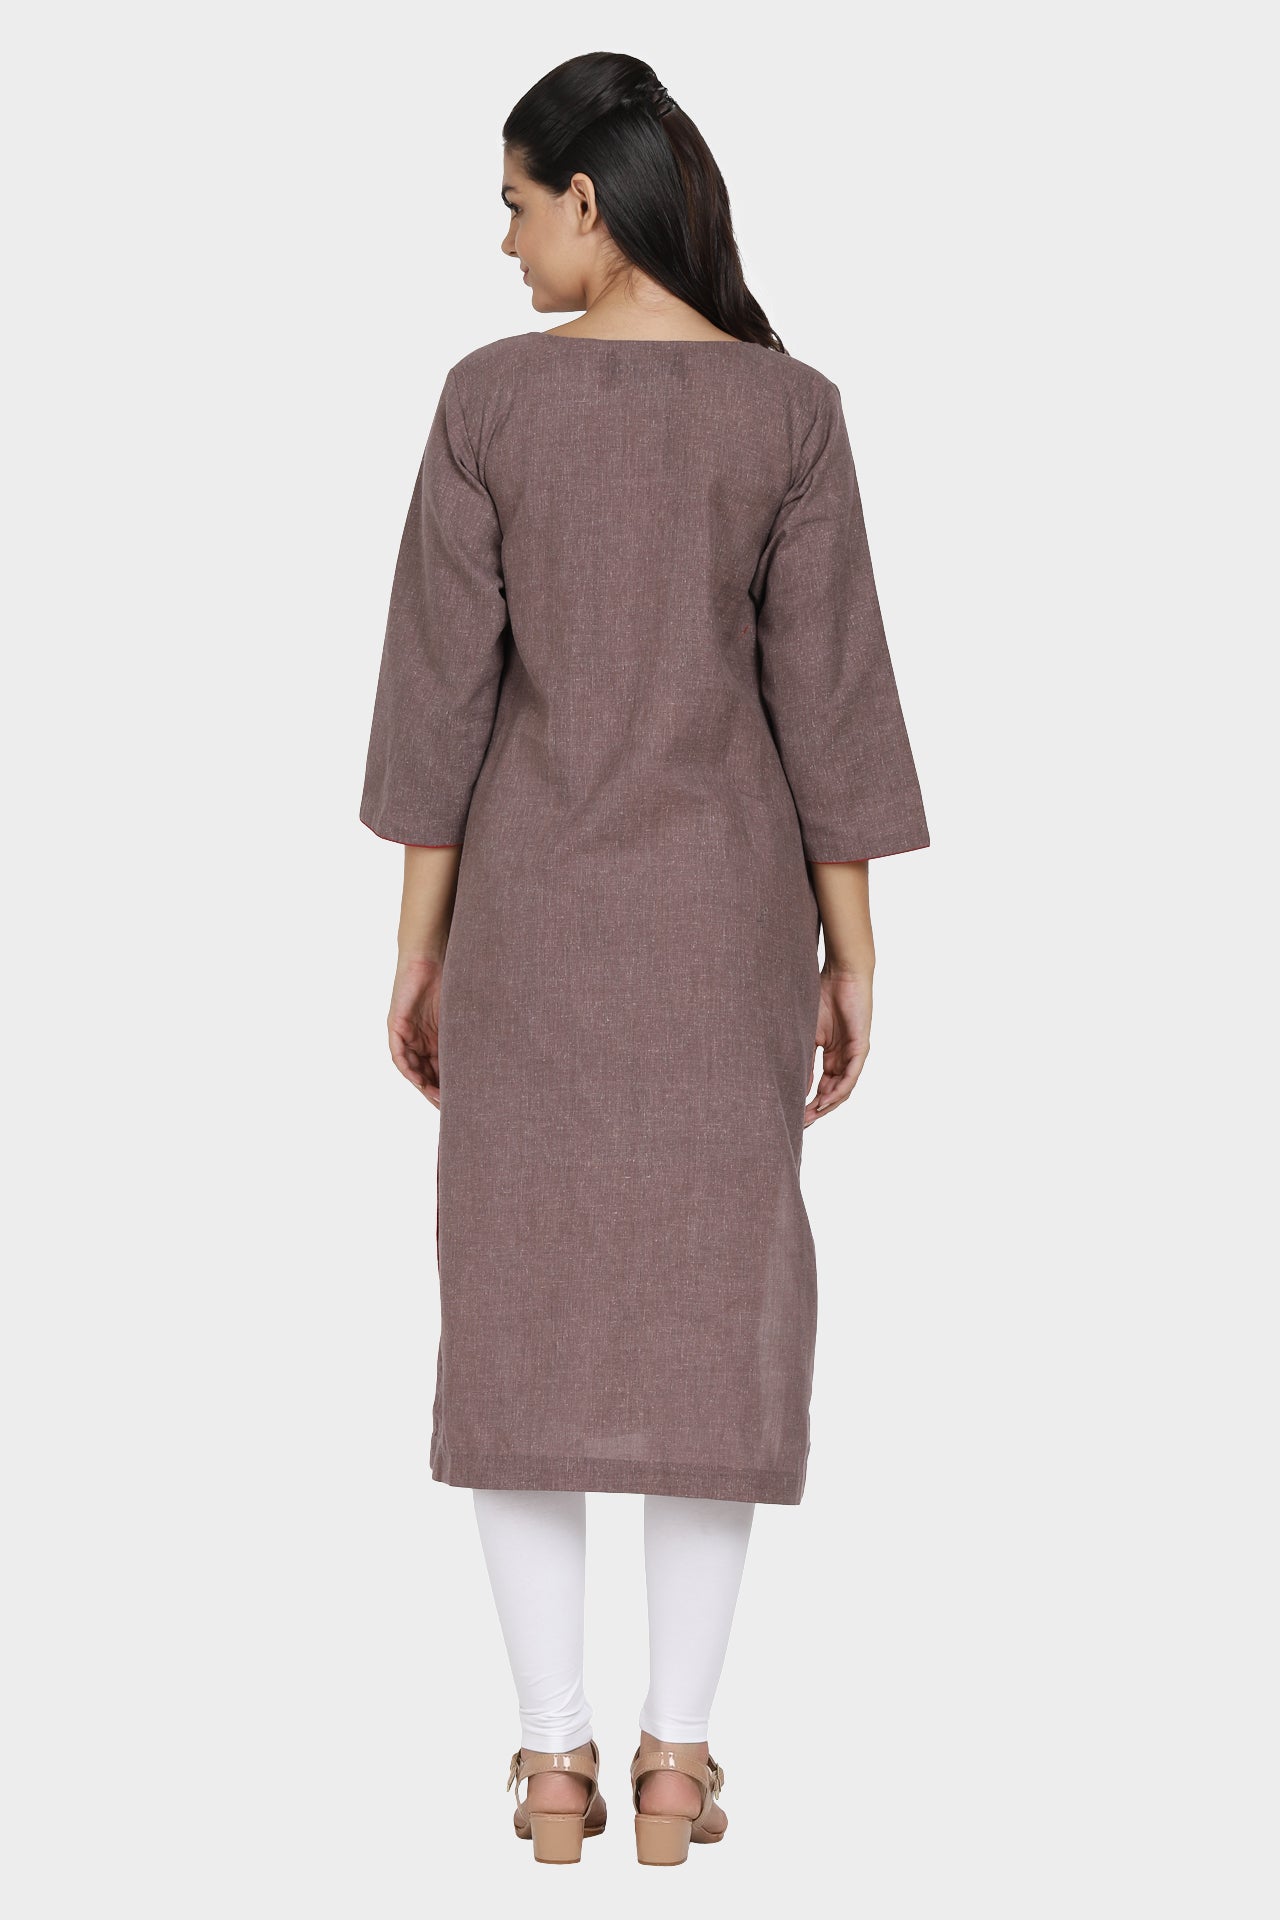 Winter Wear Brown Hand Embroidered Kurta with Tie-Up Detailing